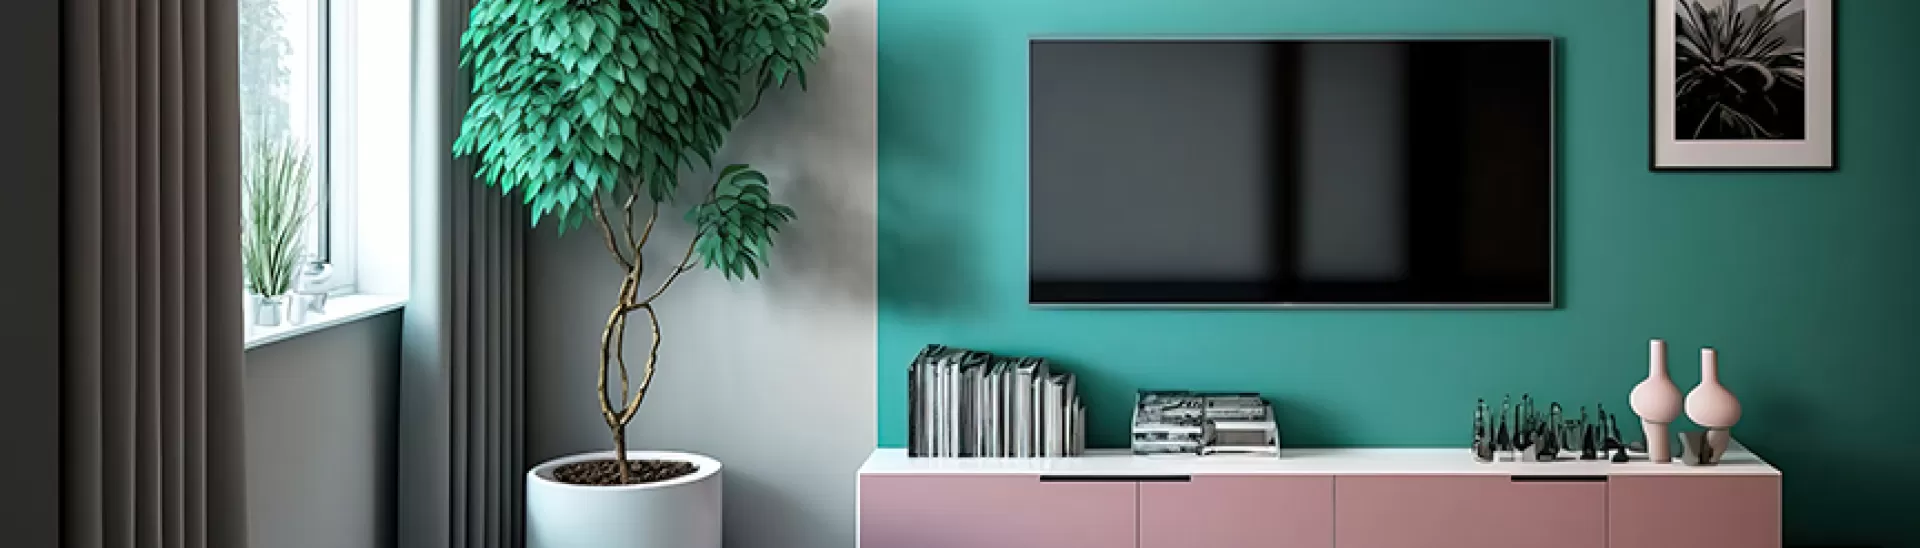 19 Ideas That Prove A TV Doesnt Need To Be An Eyesore  Posh Pennies